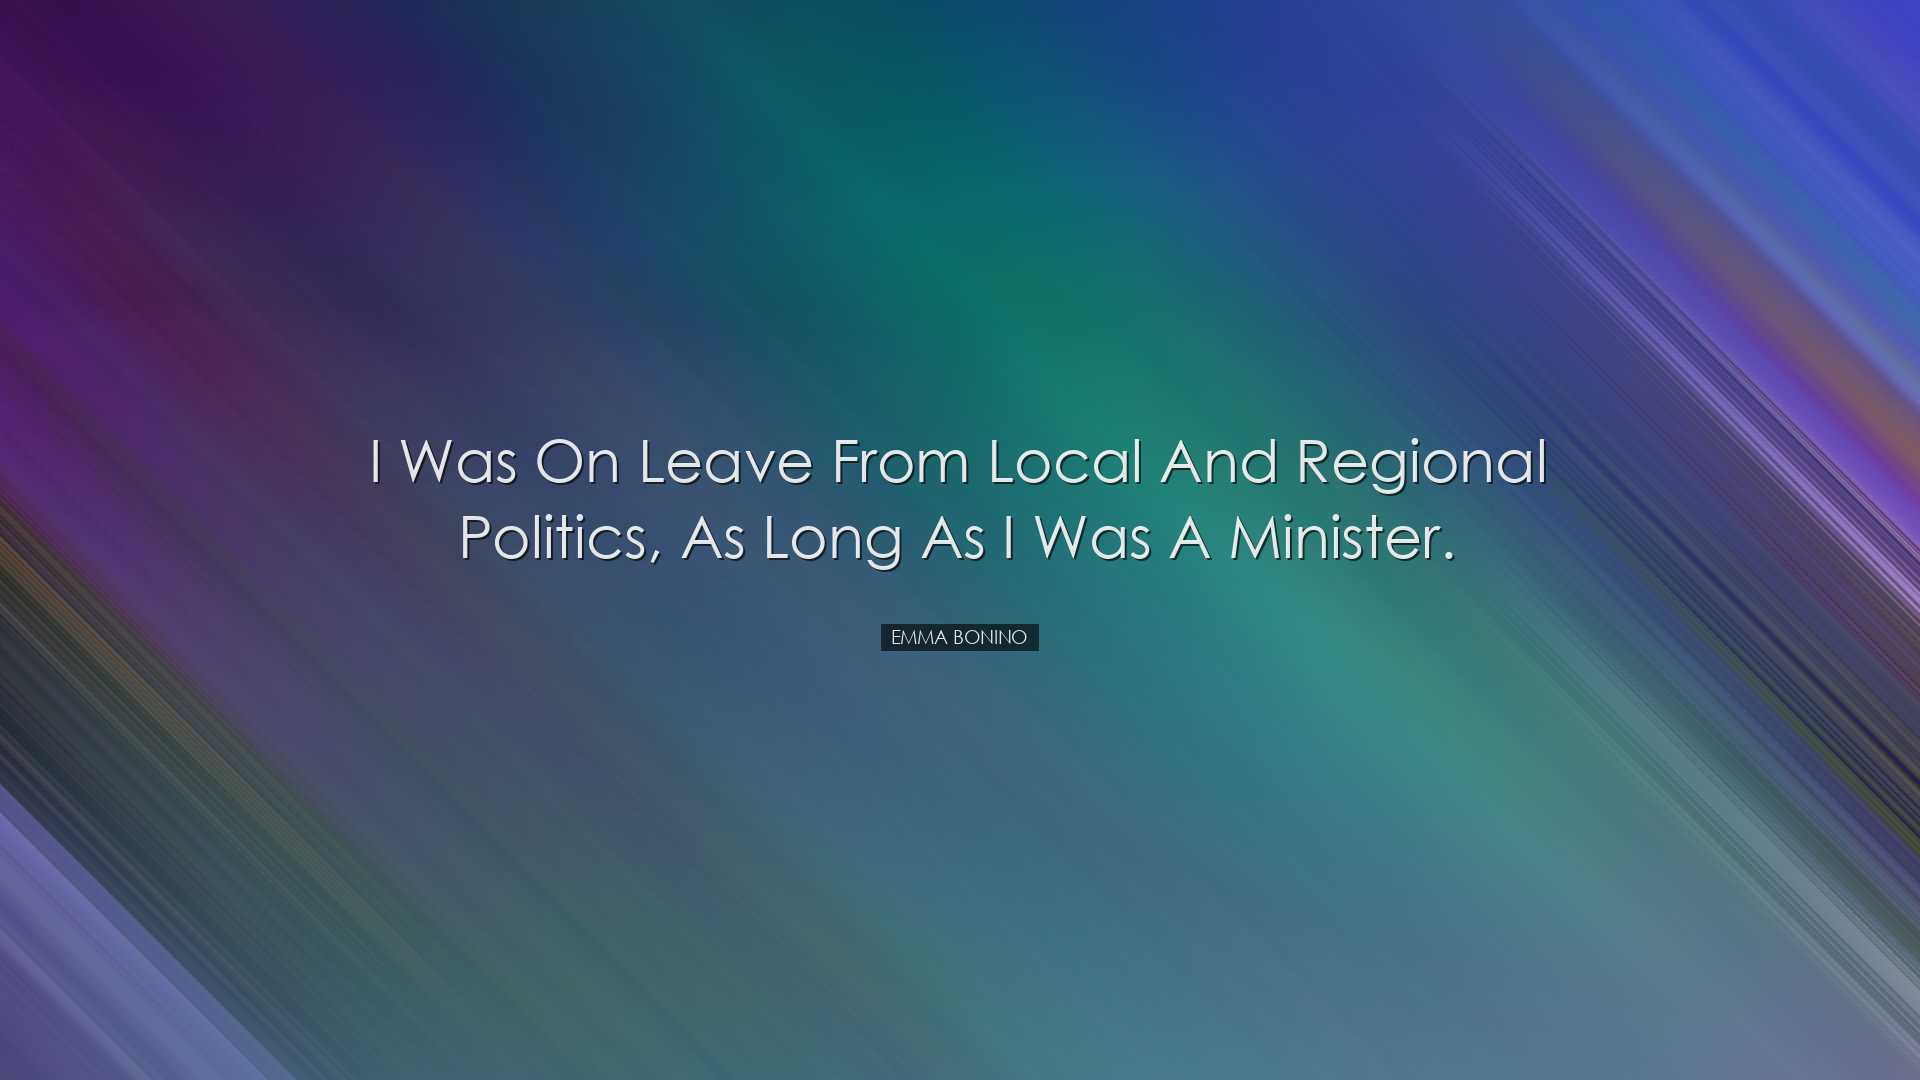 I was on leave from local and regional politics, as long as I was